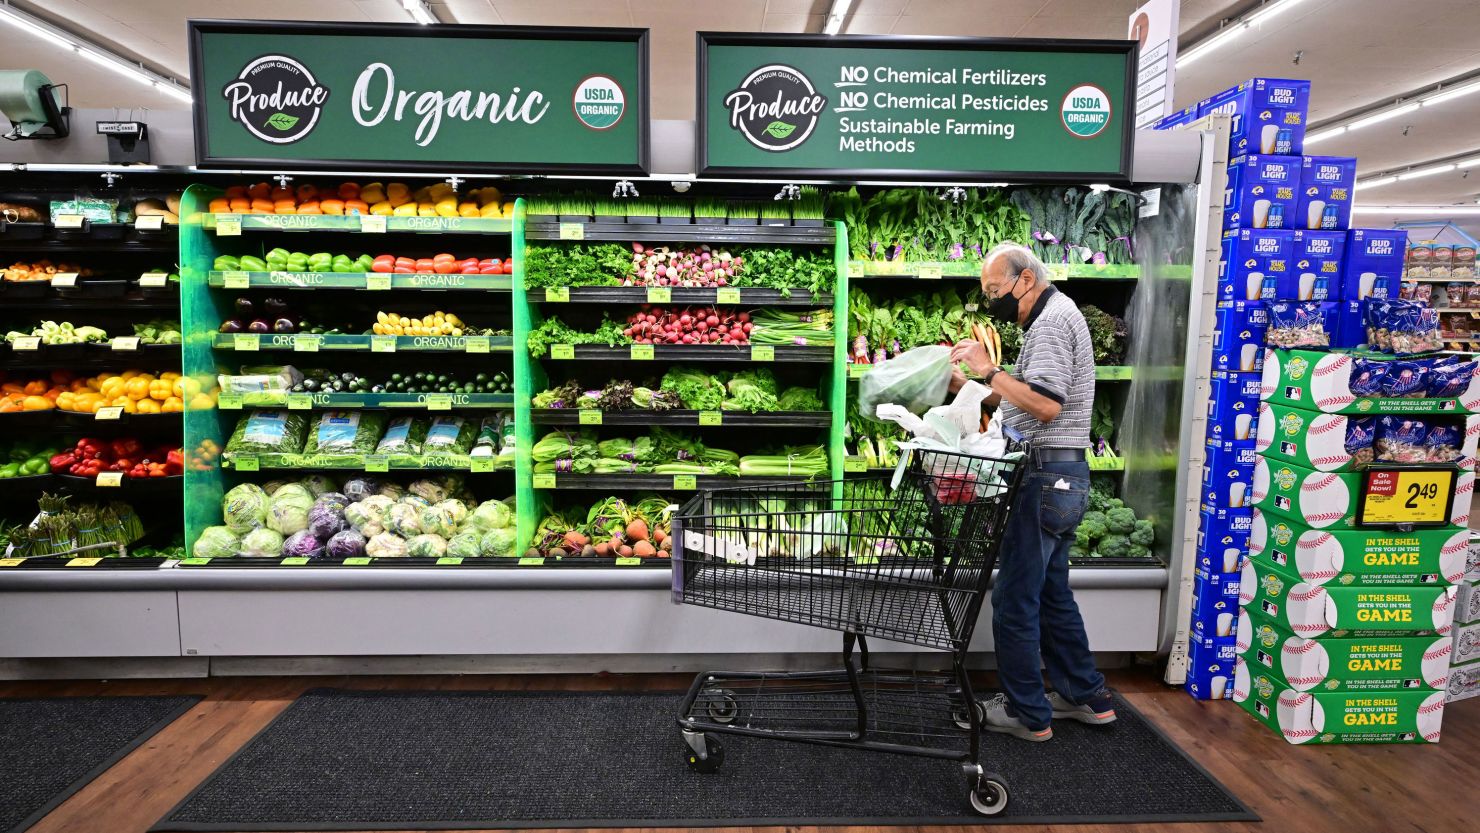 A shopper looks at organic produce at a supermarket in Montebello, California, on August 23, 2022.